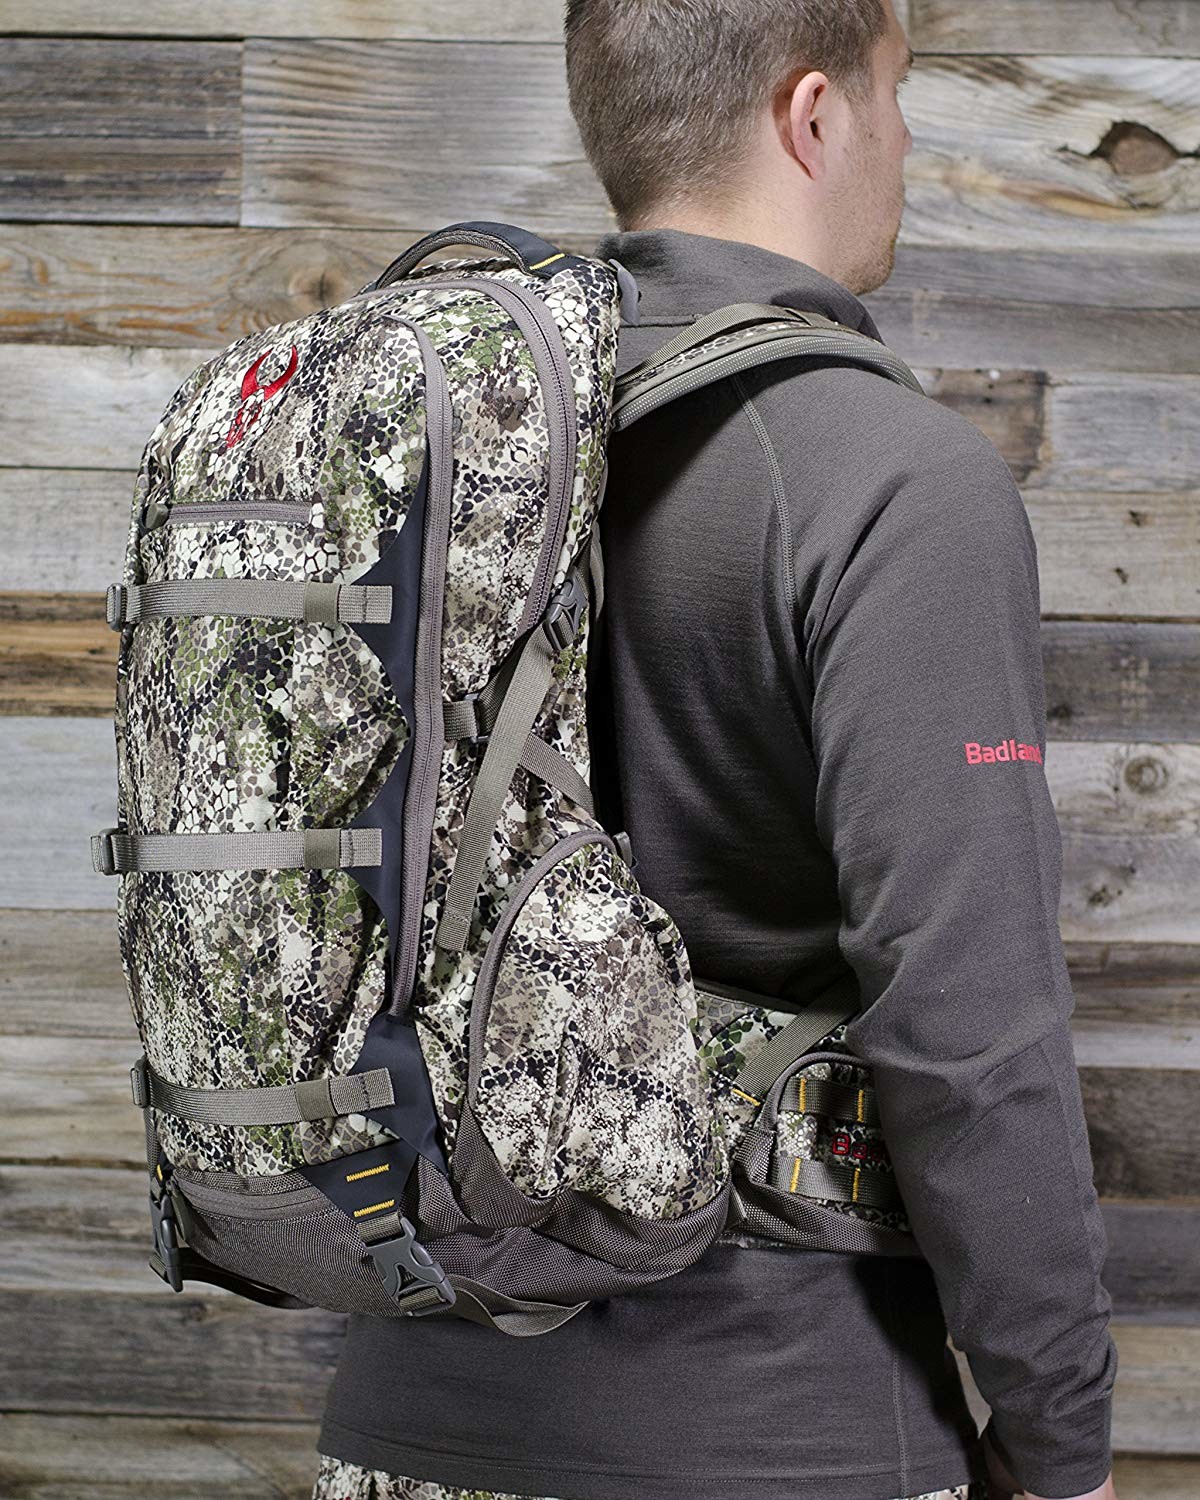 Badlands 21-12876 Diablo Dos Approach Camo Hunting Pack - image 3 of 5